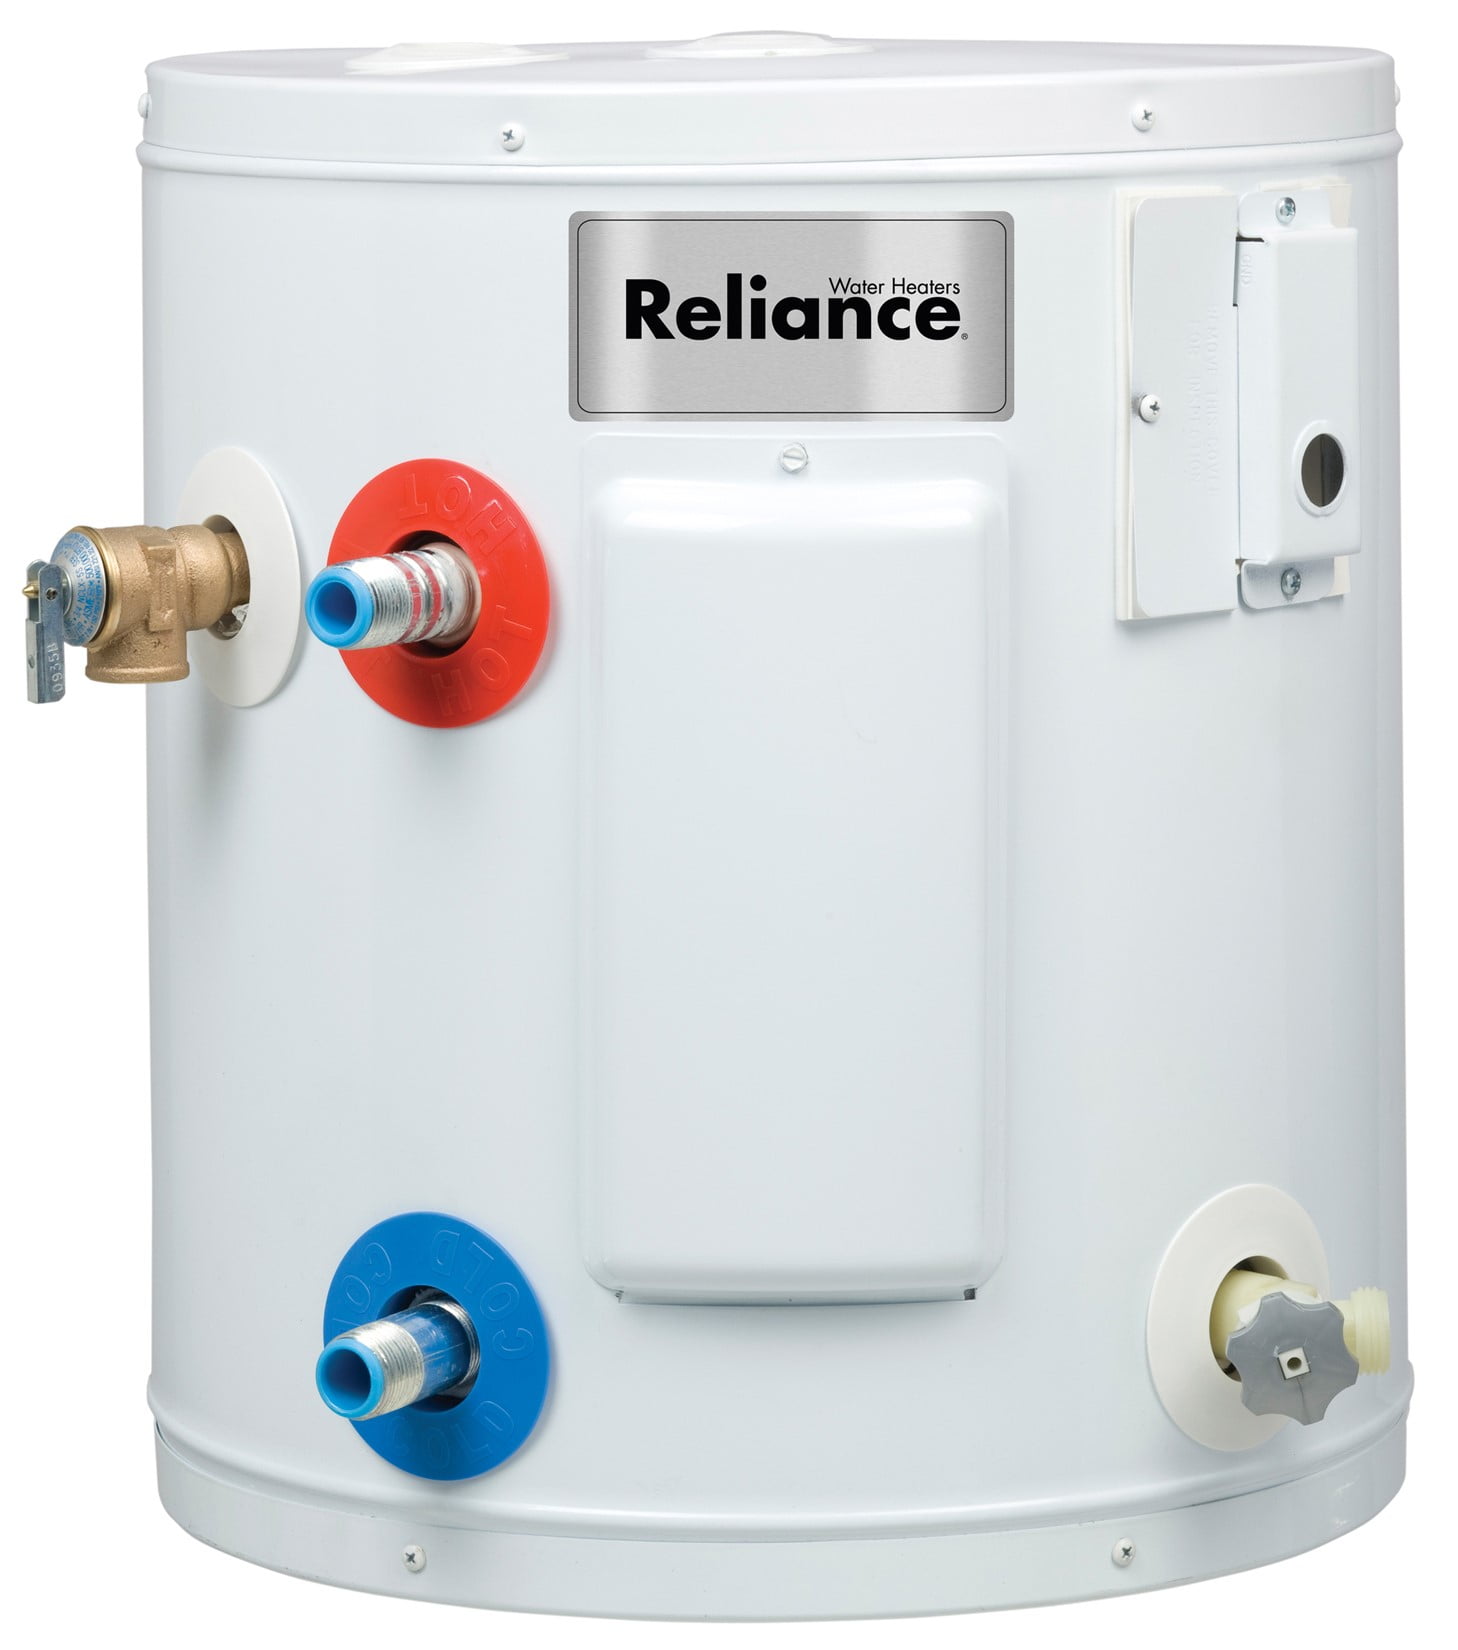 Reliance 30 Gallon Tall Electric Water Heater